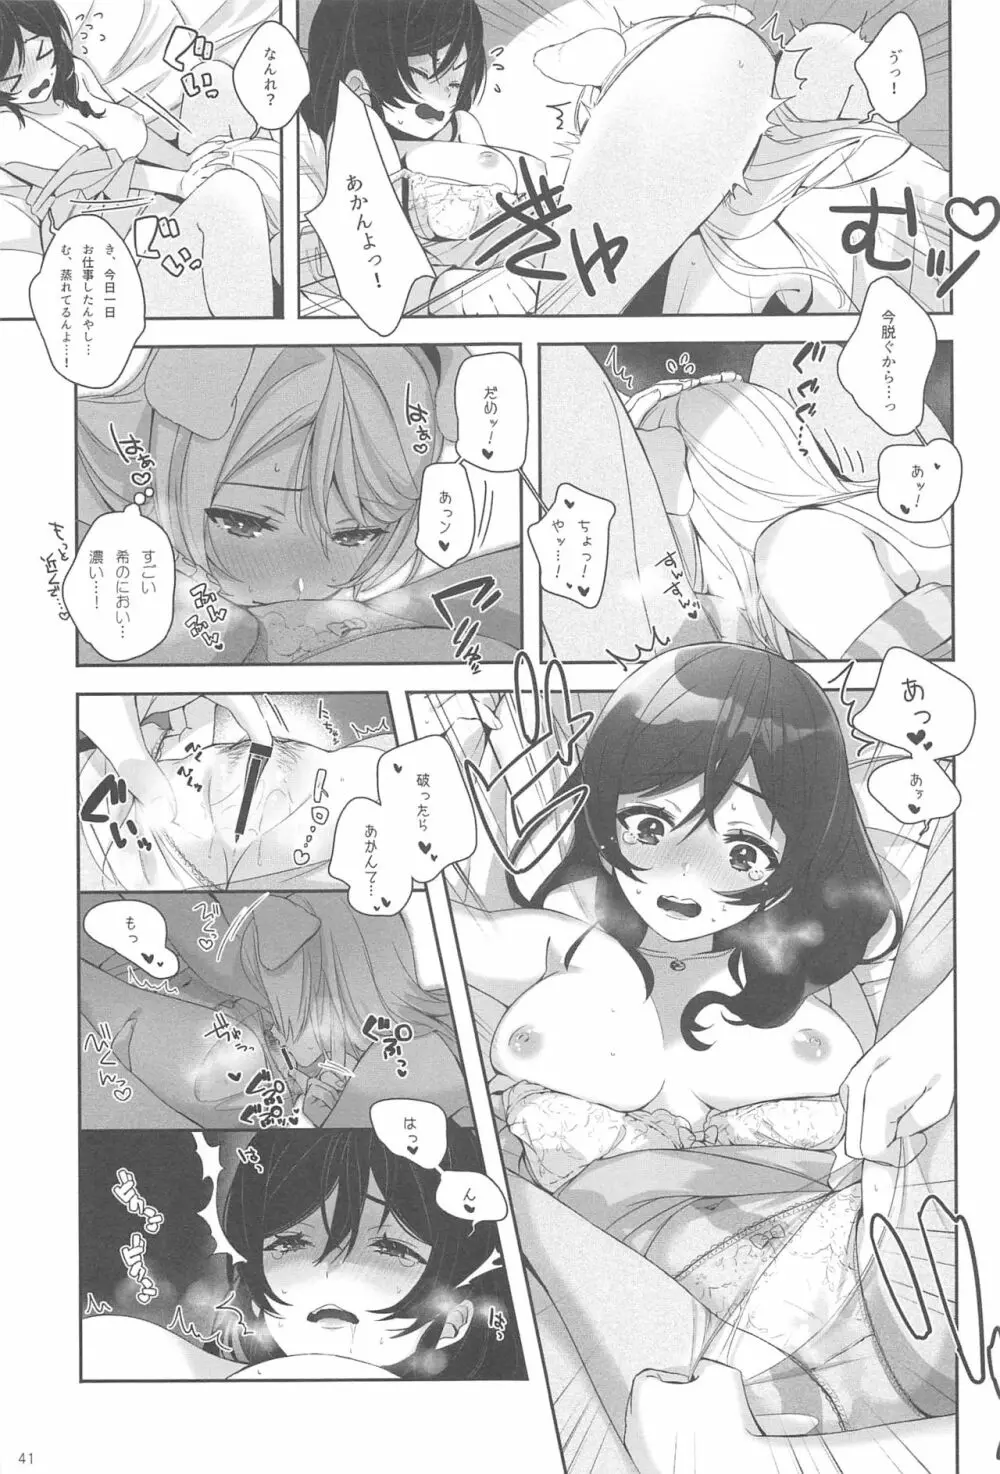 Re:デーデッデー!!!!!!!! - page42